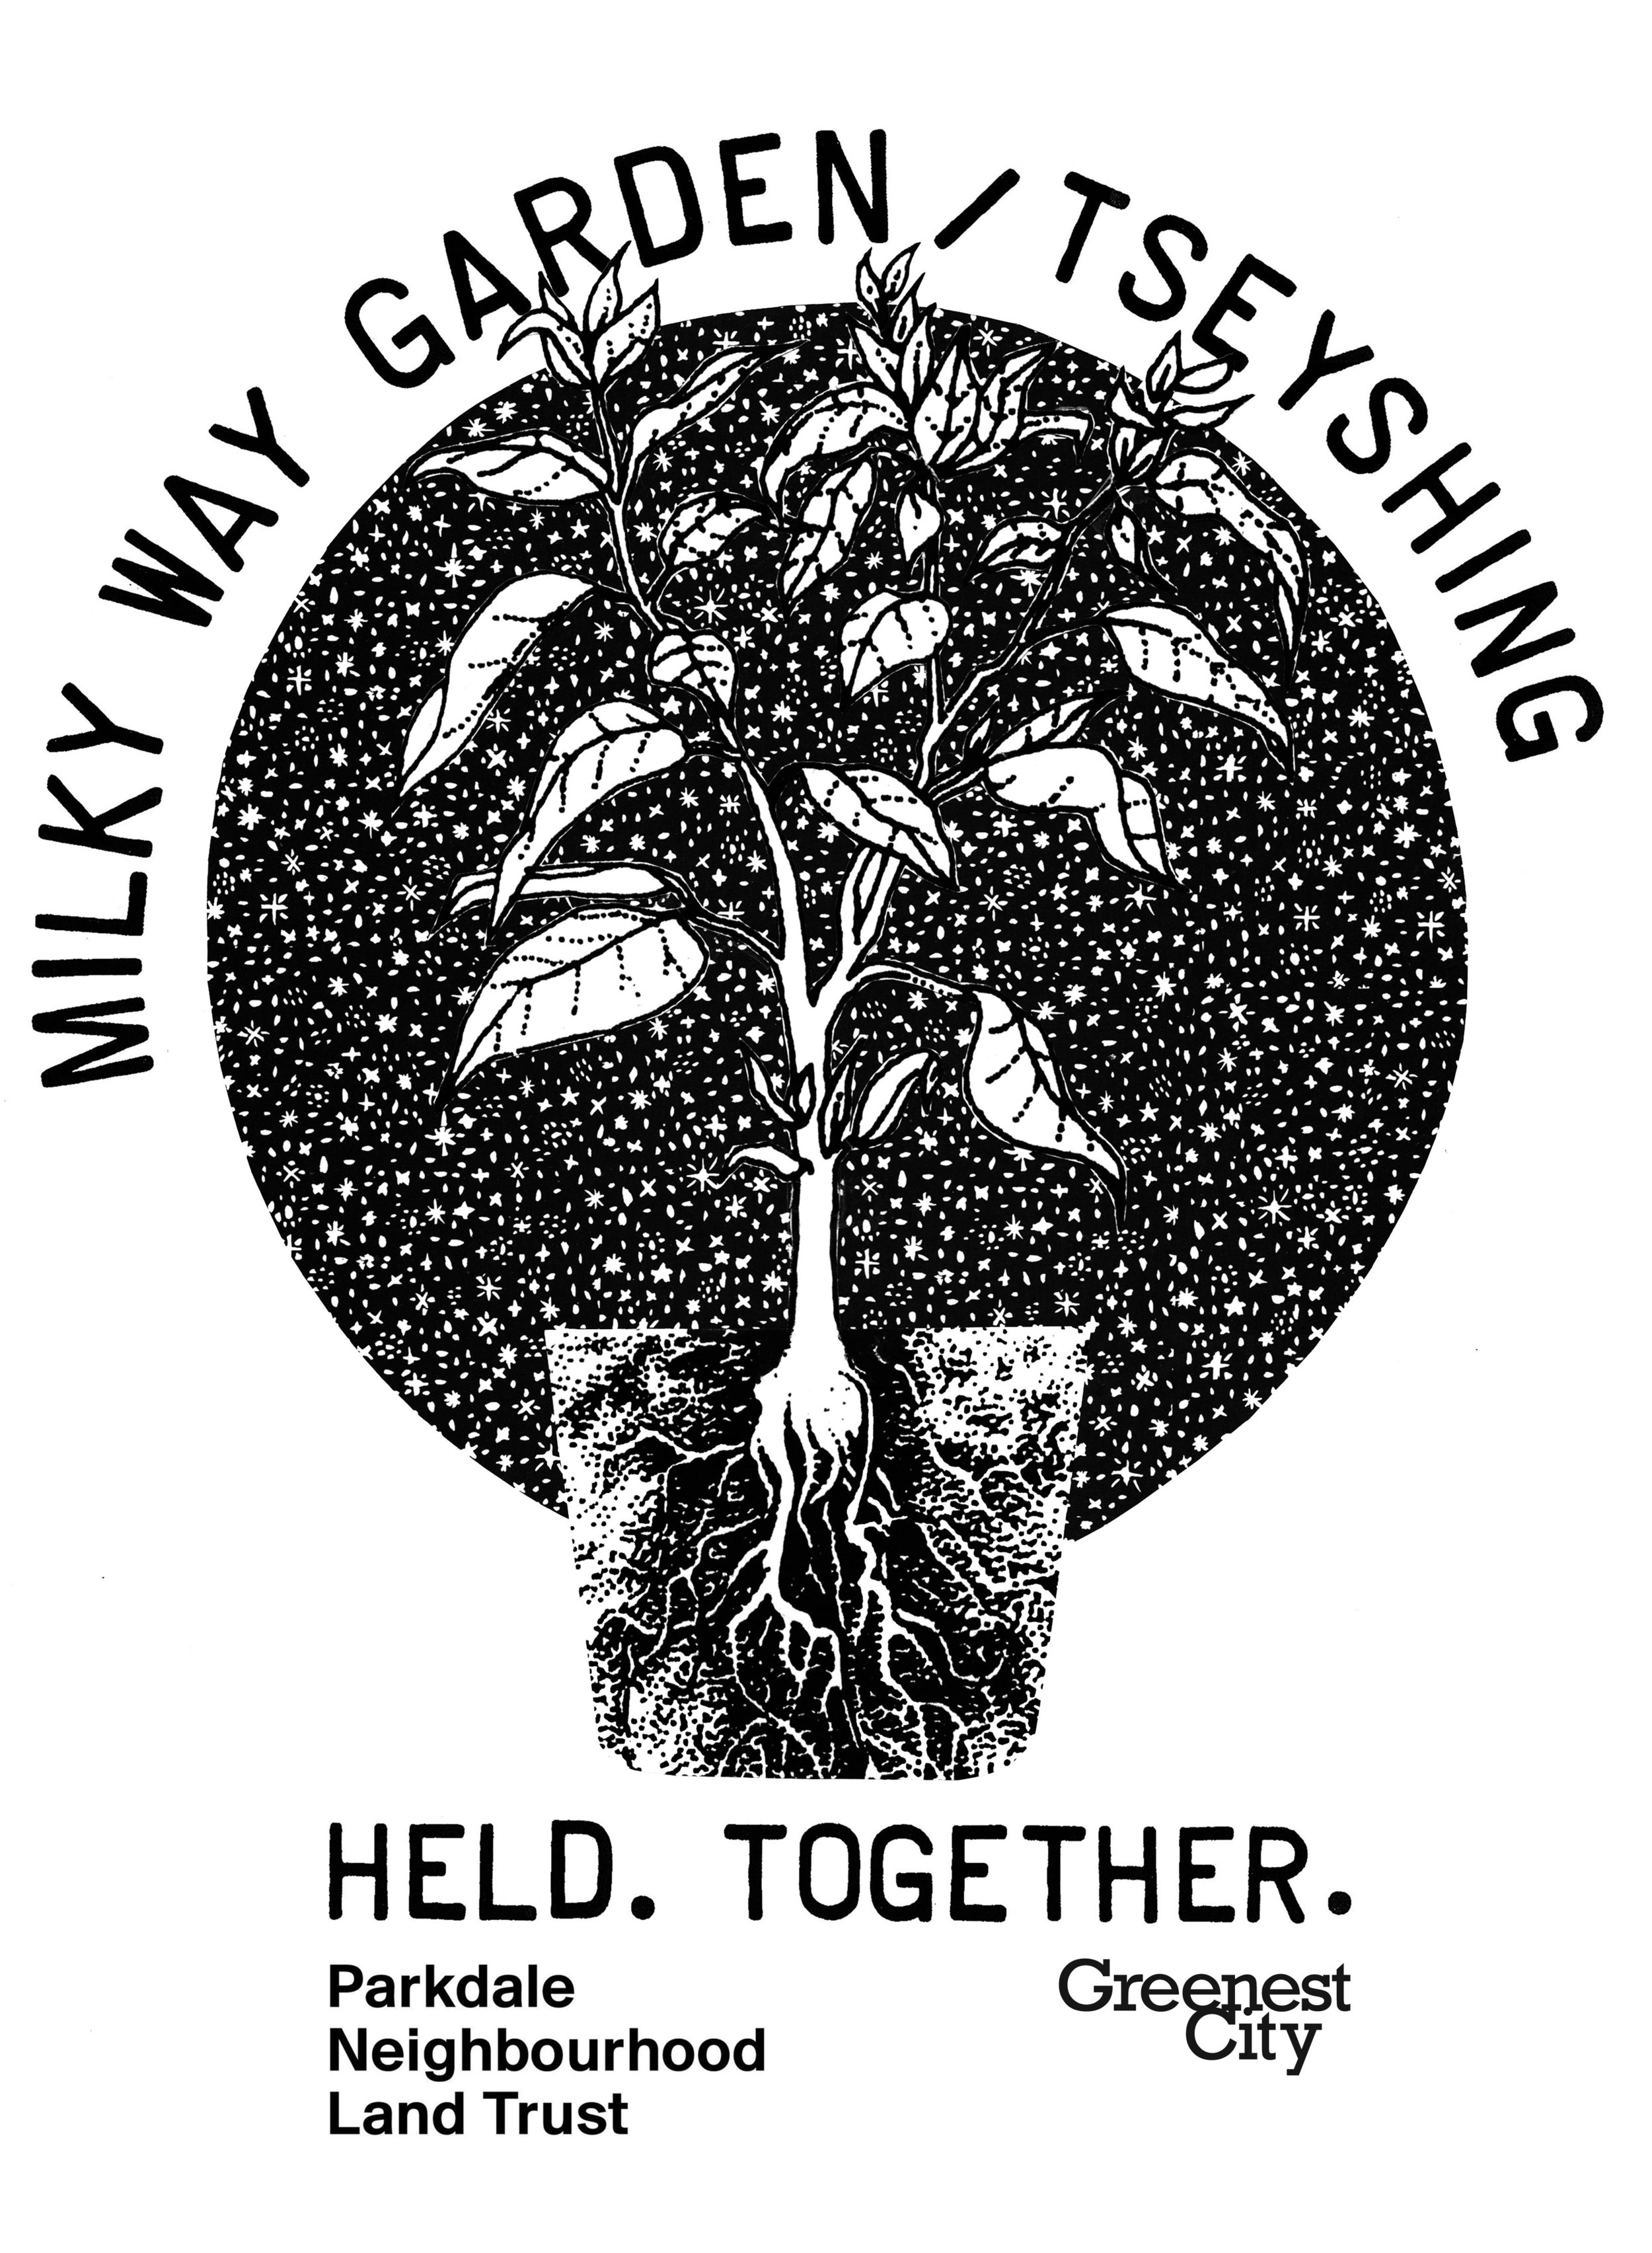  t-shirt design for Milky Way Garden  2016  The Milky Way Garden is a publicly accessible lot that is managed and owned by Greenest City and Parkdale Neighborhood Land Trust. For the last nine years, this lot has included a Second Language newcomers 